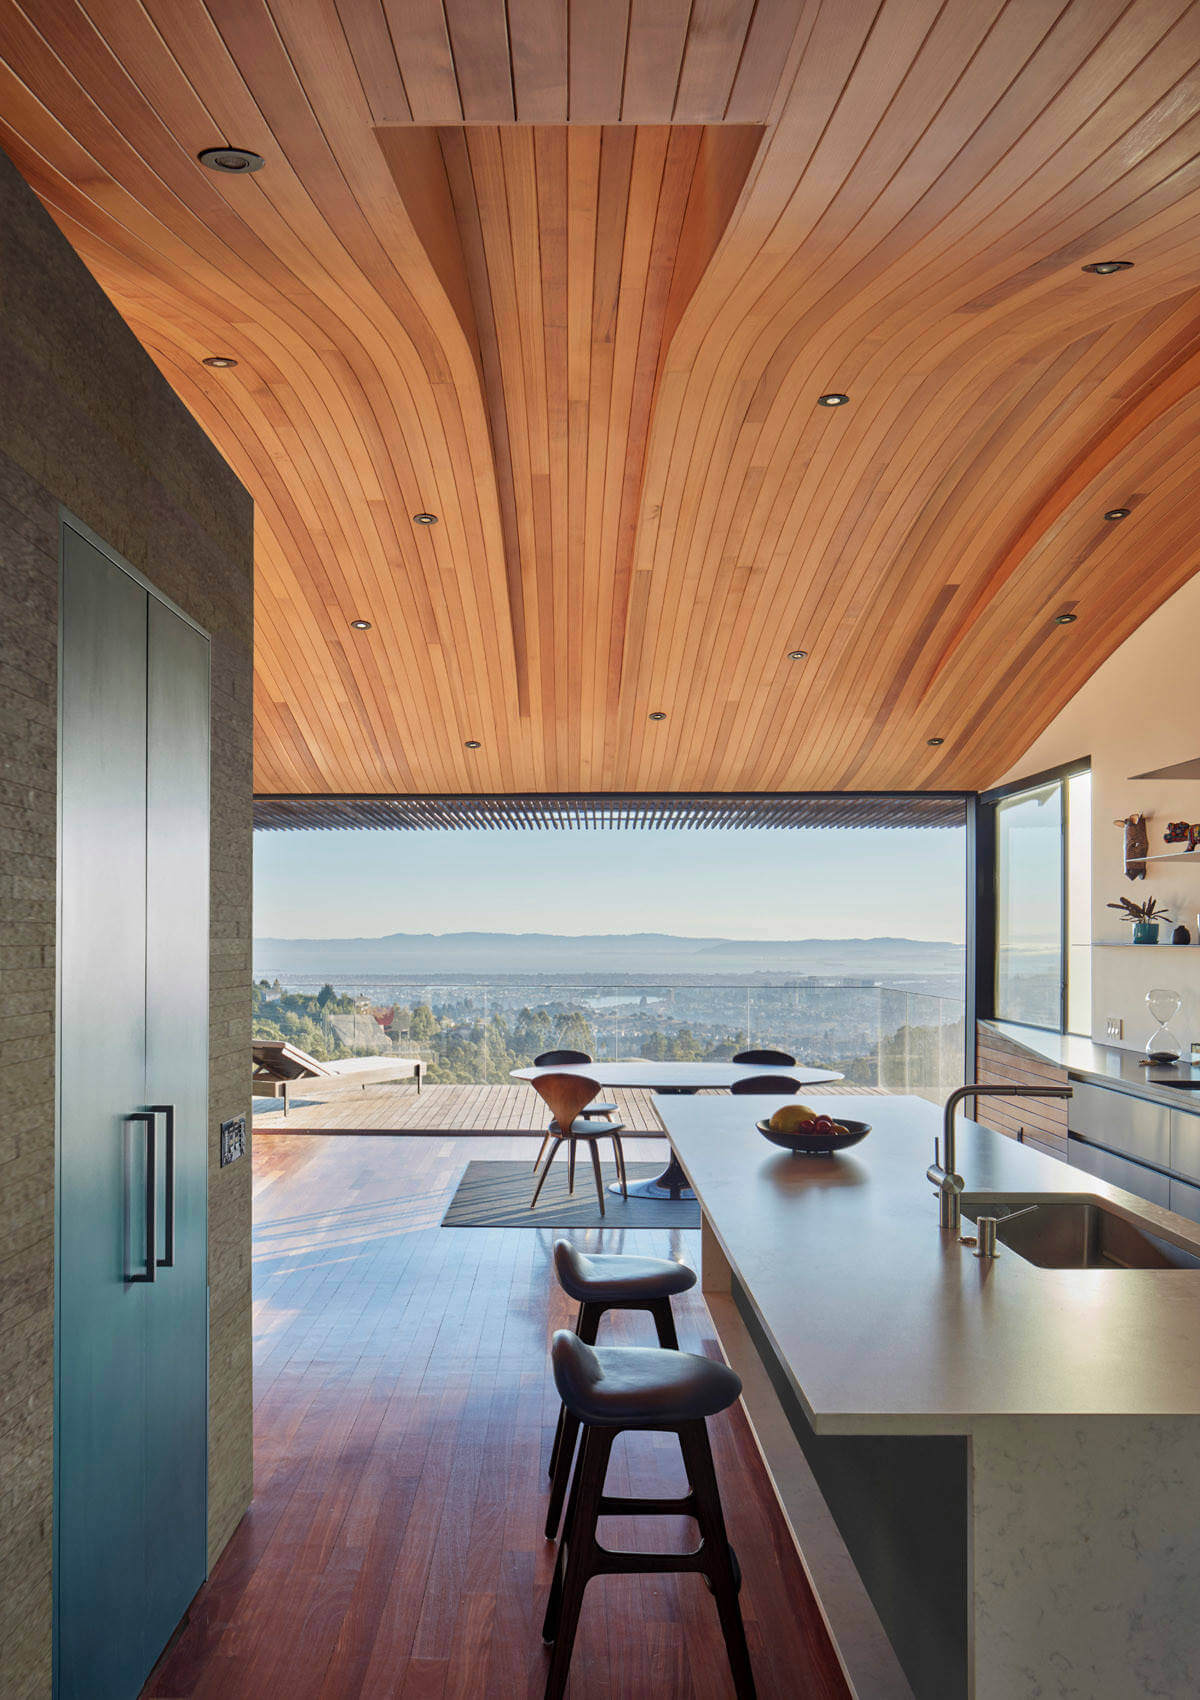 Skyline House by Terry and Terry Architecture